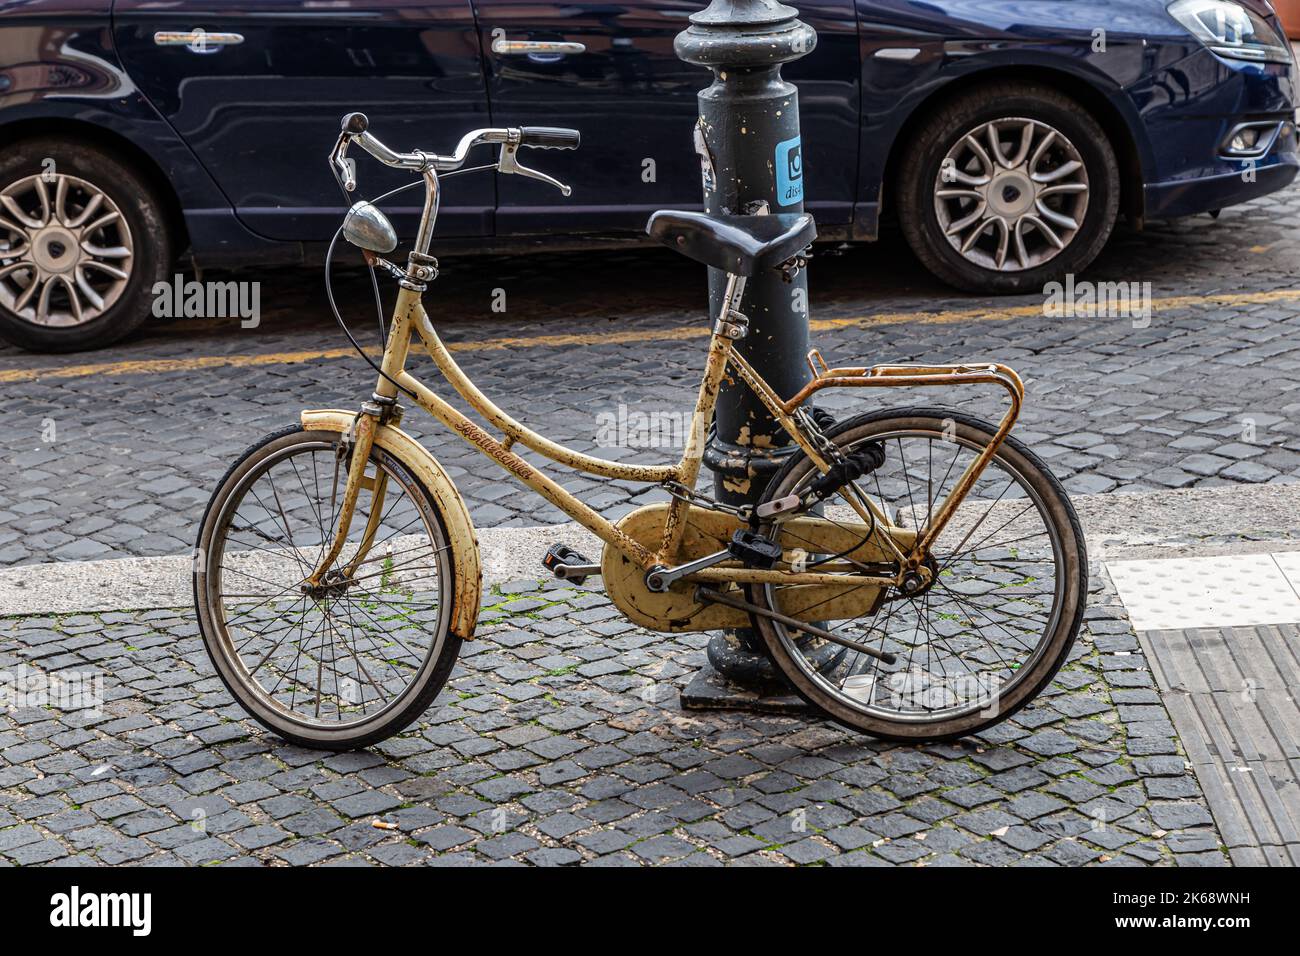 Rome, Italy - December 06, 2019:  Old yellow bicycle parked in the city center in Rome, Italy Stock Photo